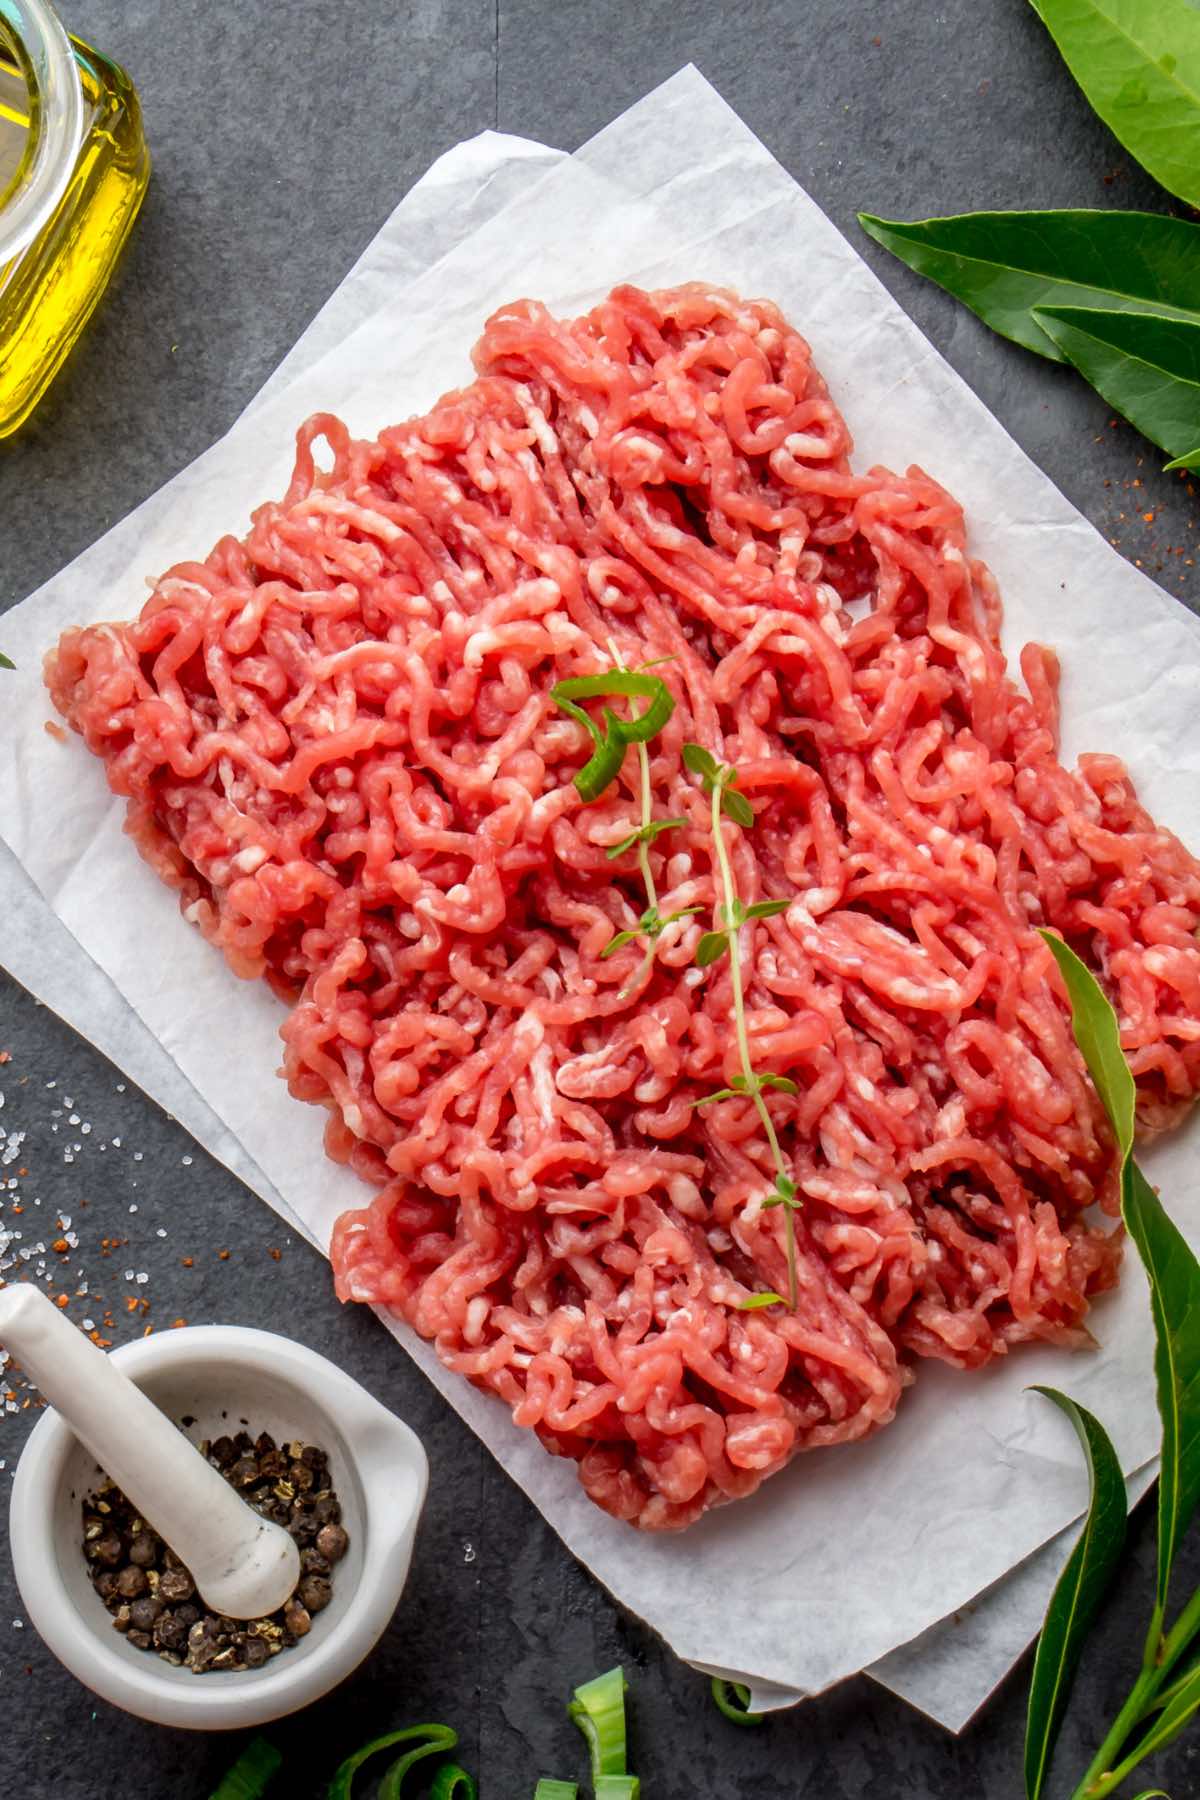 how long cooked ground beef in fridge